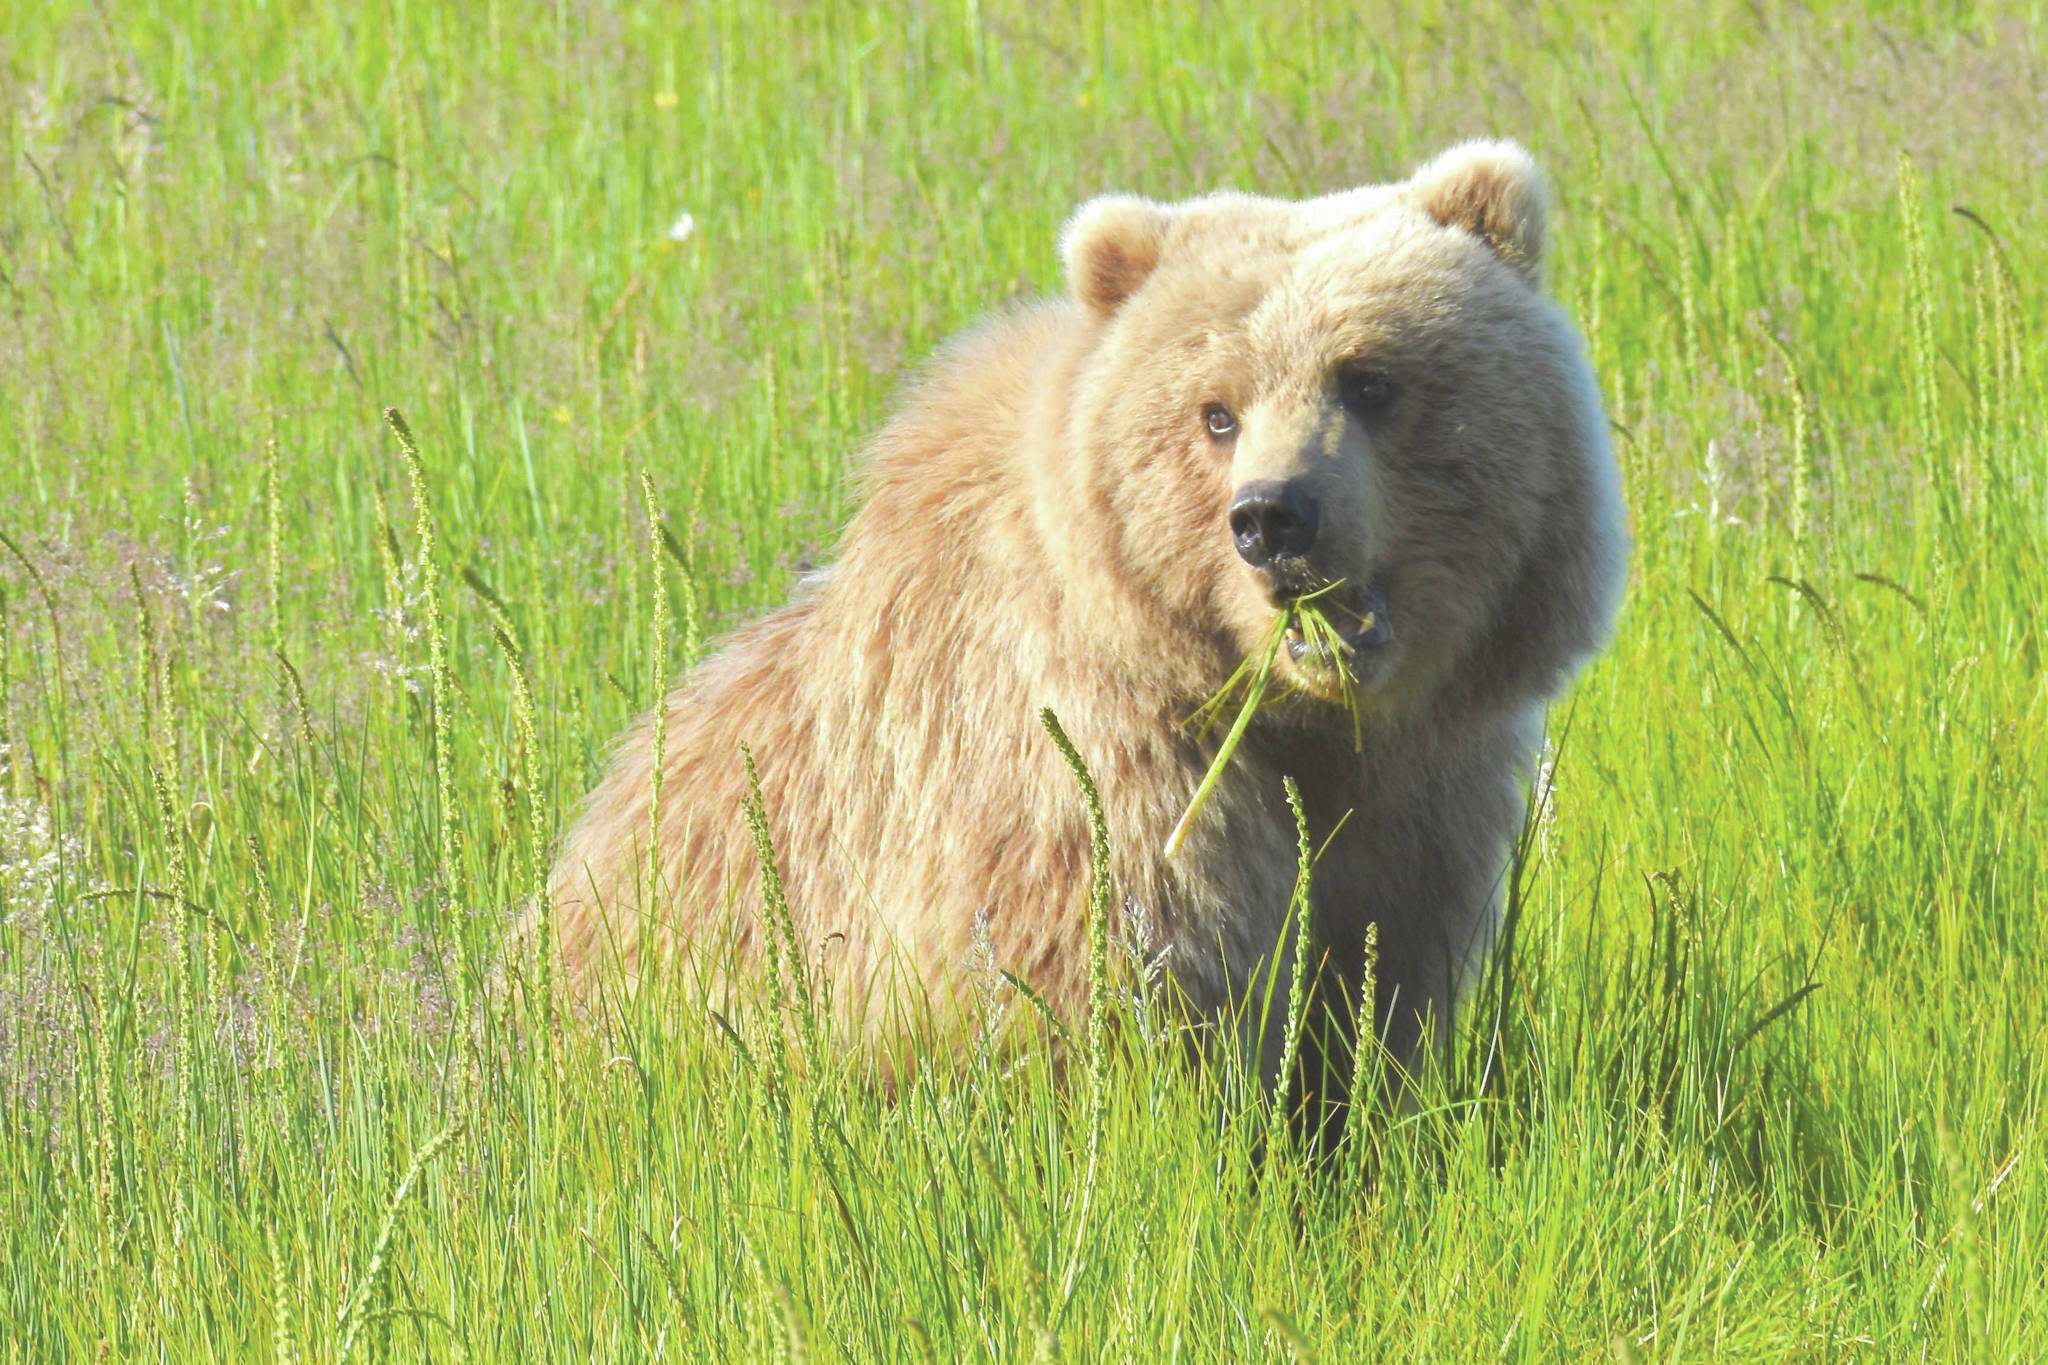 Salt marshes are important food sources for brown bears. As we see an earlier start to the growing season or increased plant growth, bears will likely benefit from them even more. (Photo by Michael Hannam/NPS)